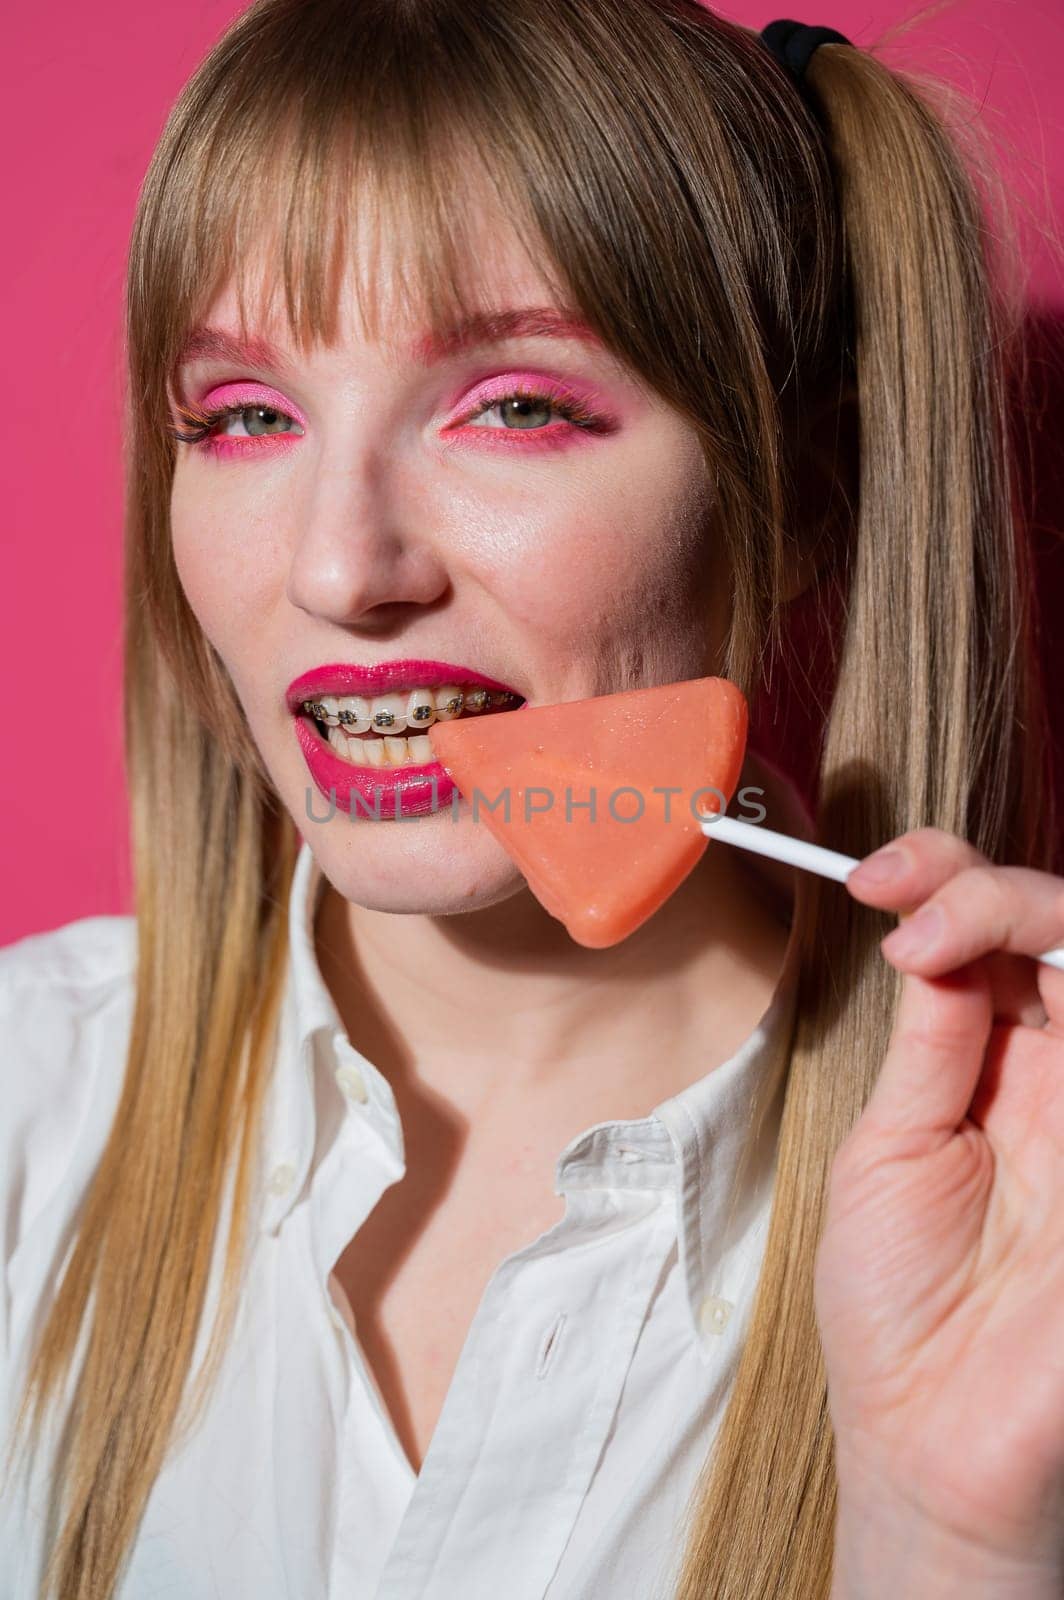 Portrait of a young woman with braces and bright makeup eating a lollipop on a pink background. Vertical photo. by mrwed54